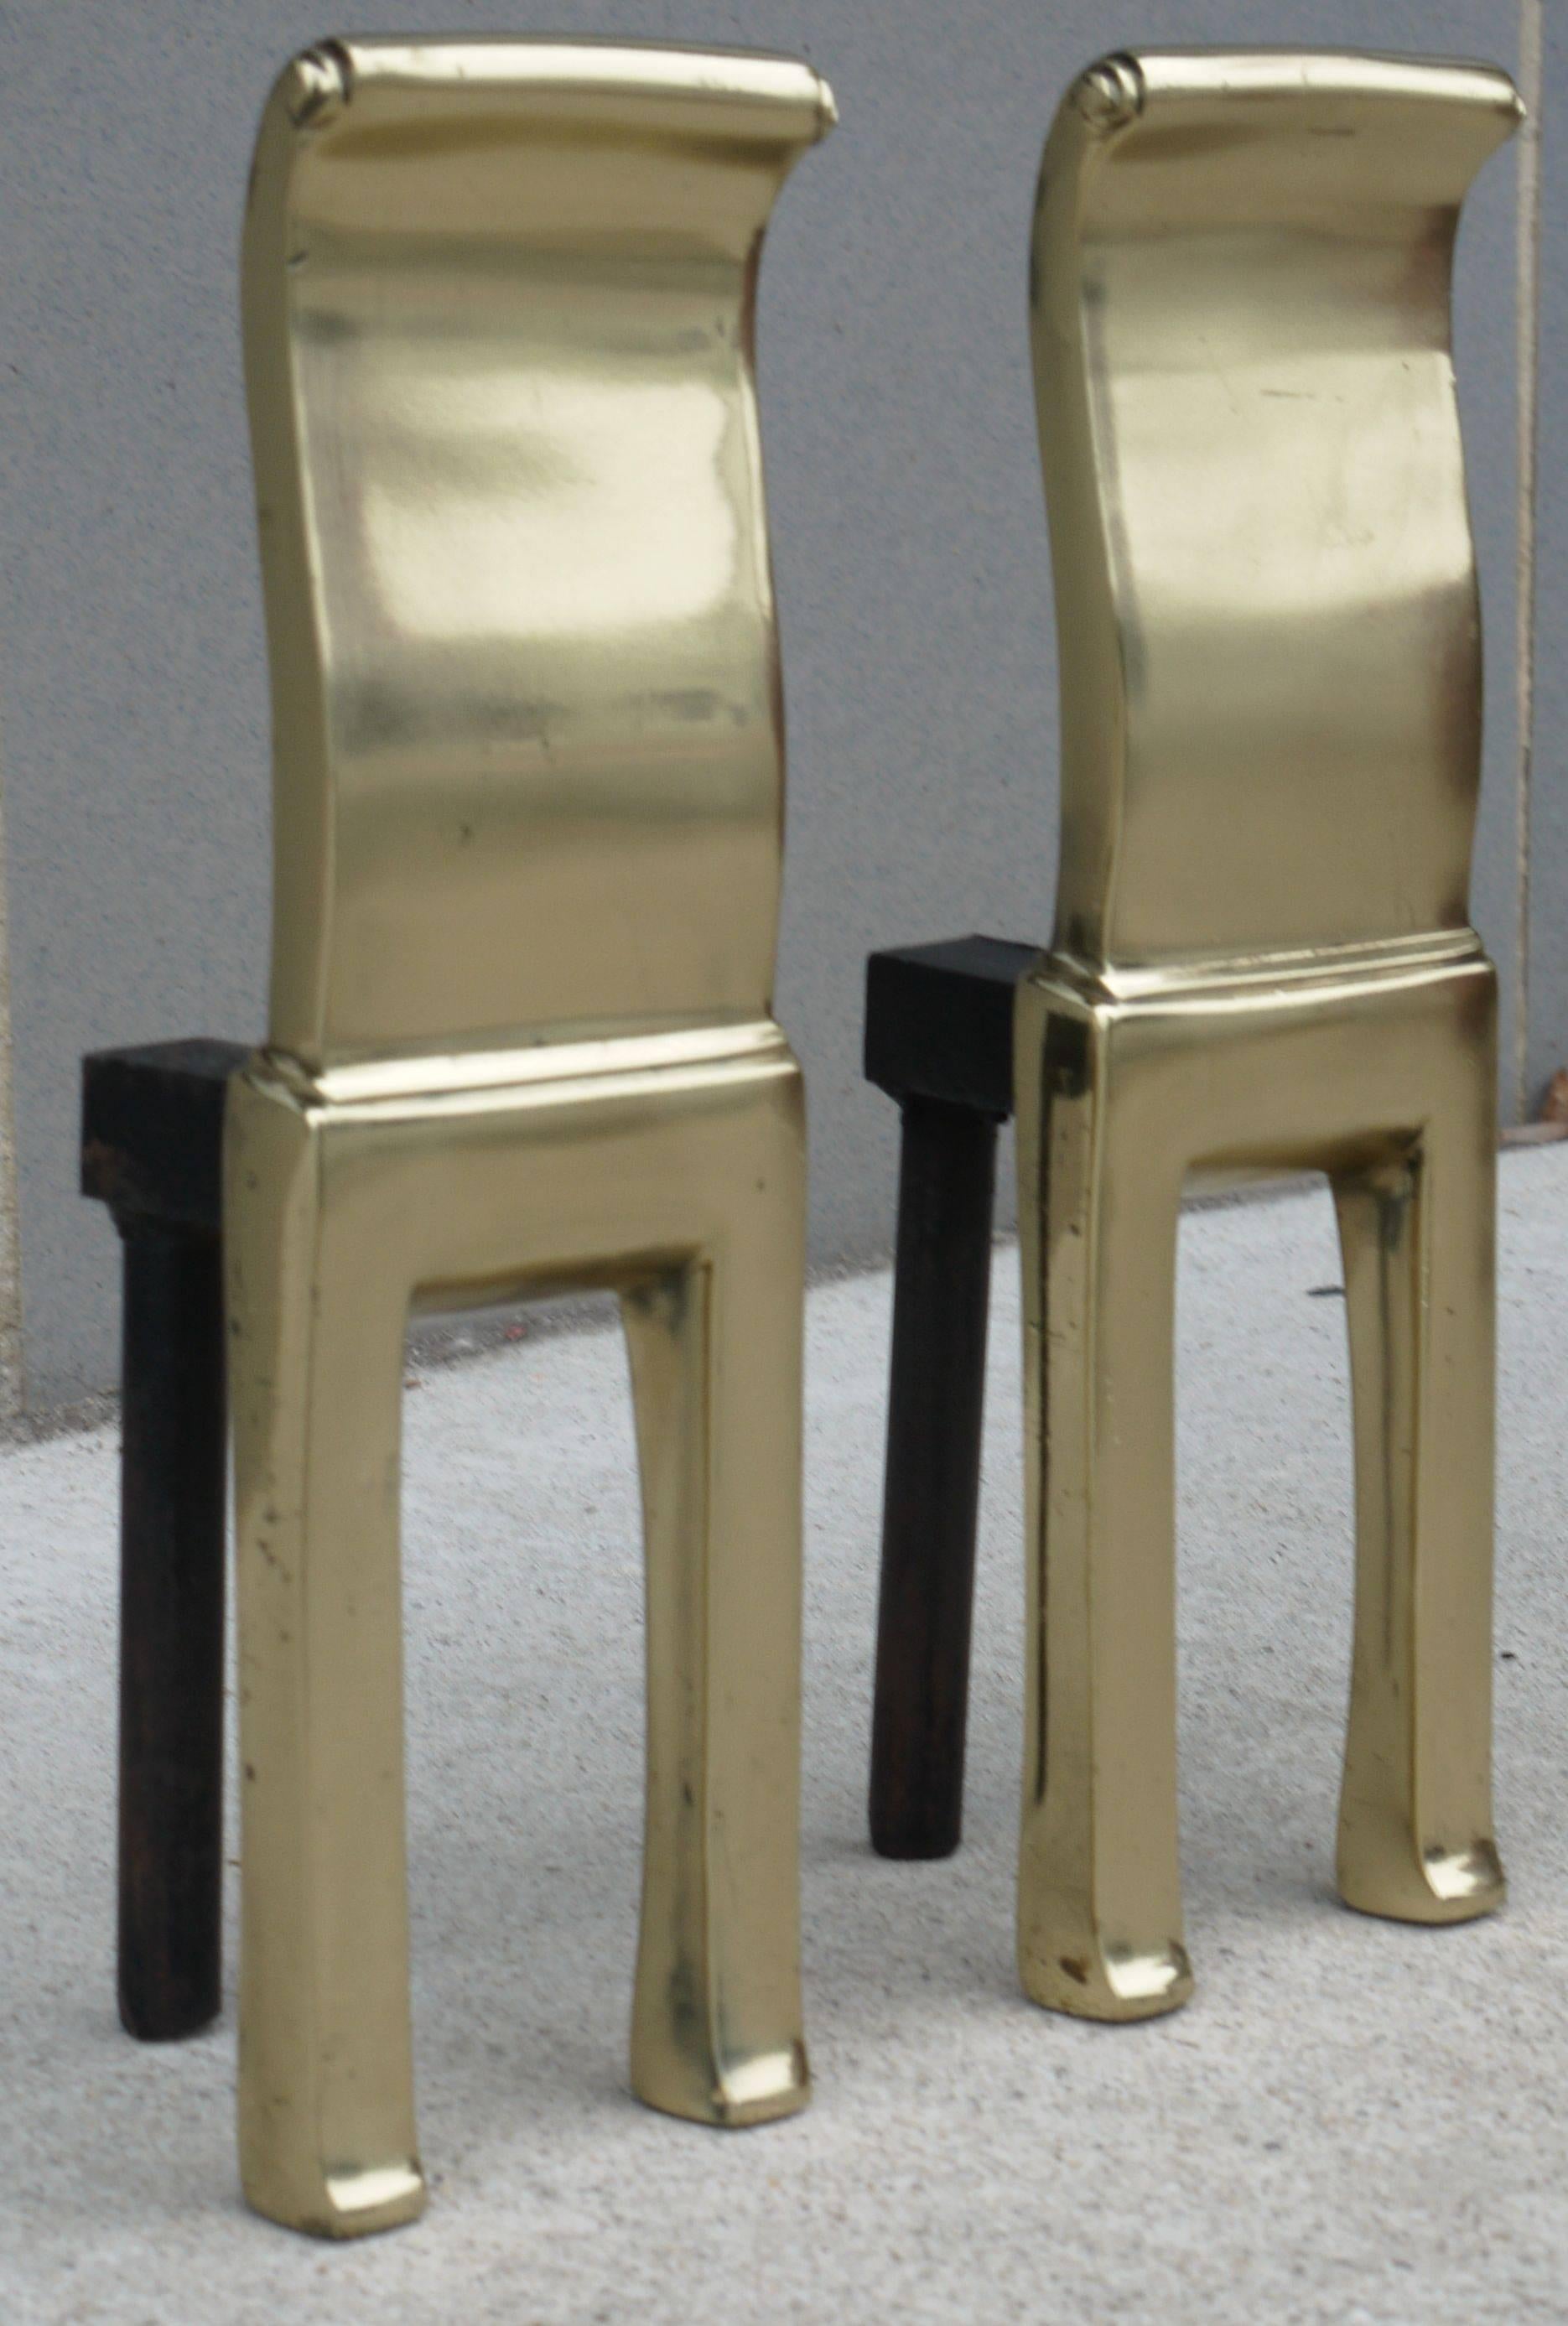 Pair of modernist brass andirons or firedogs with heavy cast iron stands by Virginia Metalcrafters. These have the shorter backs made for display or for use with a gas fireplace.